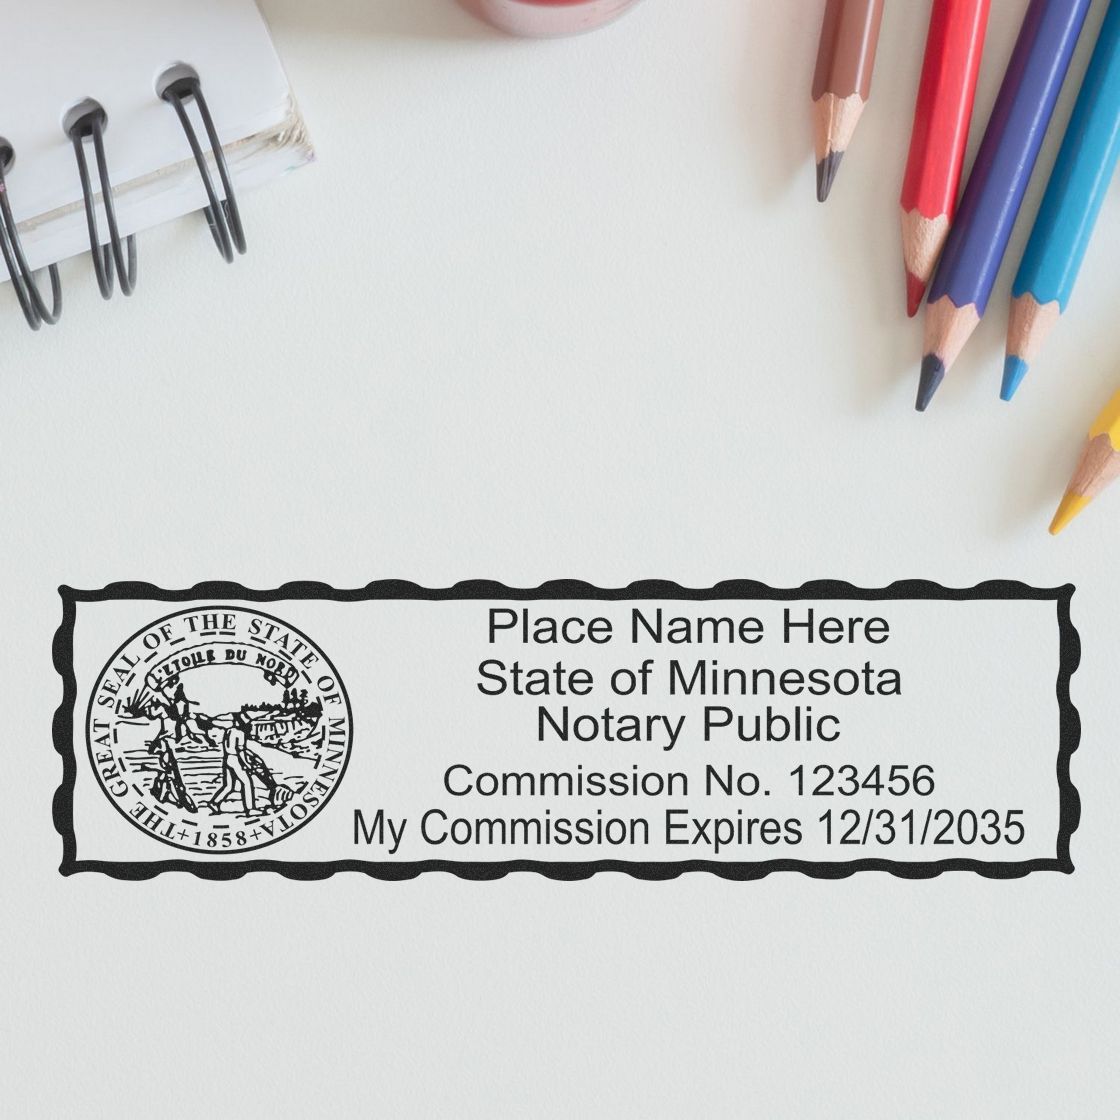 A photograph of the Wooden Handle Minnesota State Seal Notary Public Stamp stamp impression reveals a vivid, professional image of the on paper.